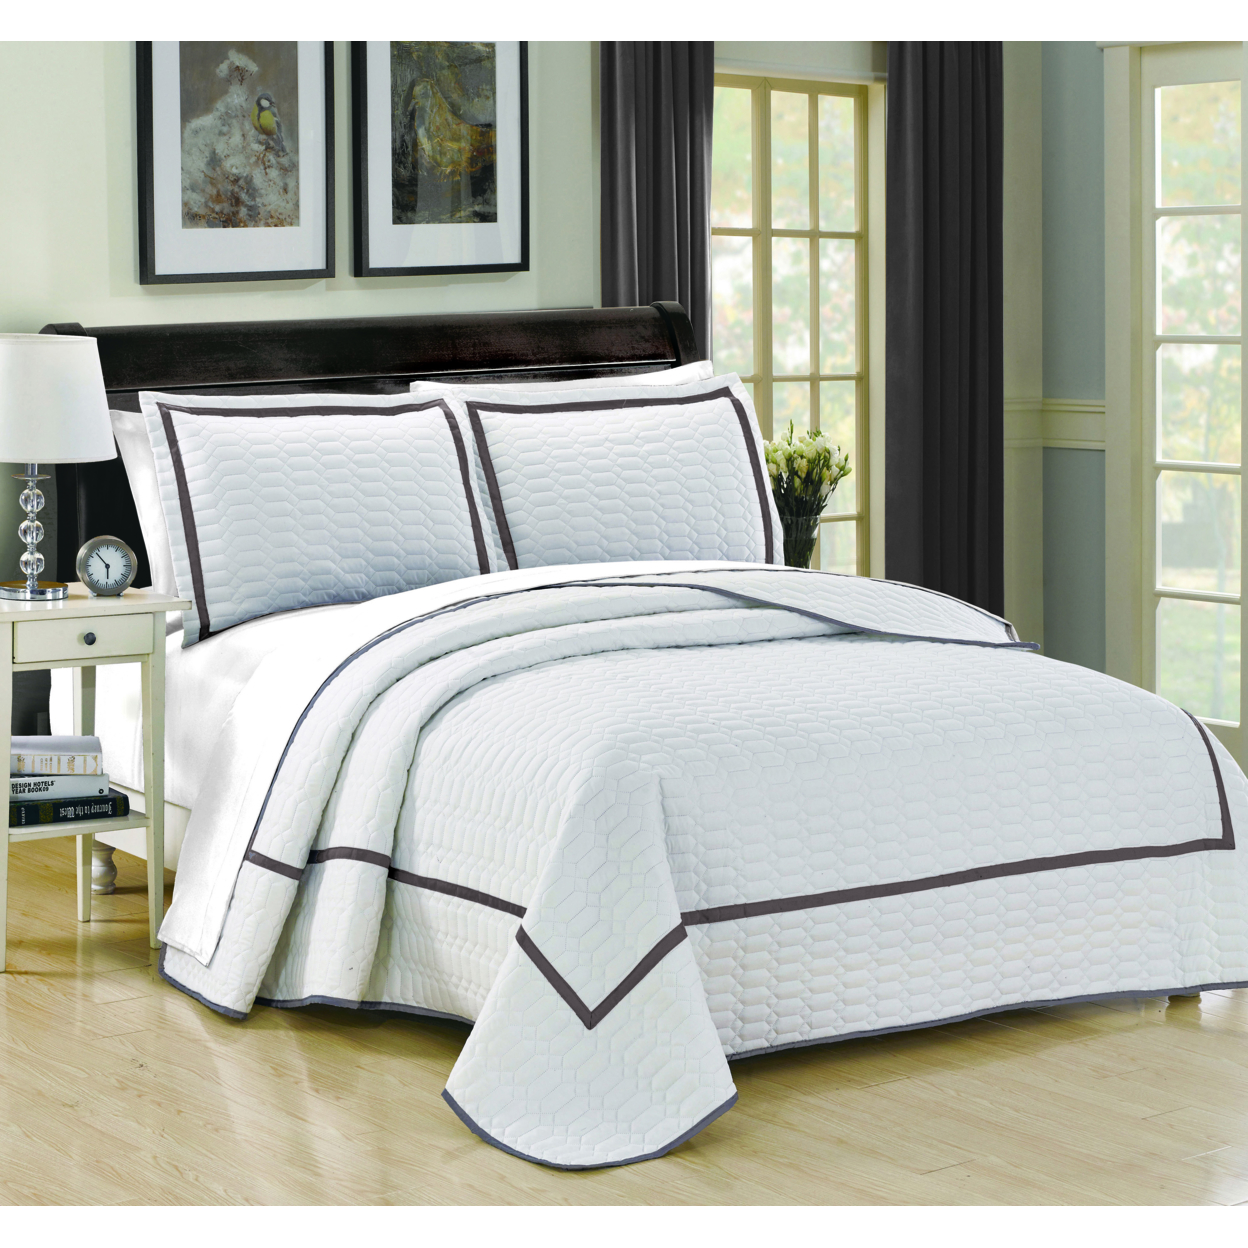 3 Or 2 Piece Halrowe Hotel Collection 2 Tone Banded Quilted Geometrical Embroidered Quilt Set - White, Queen